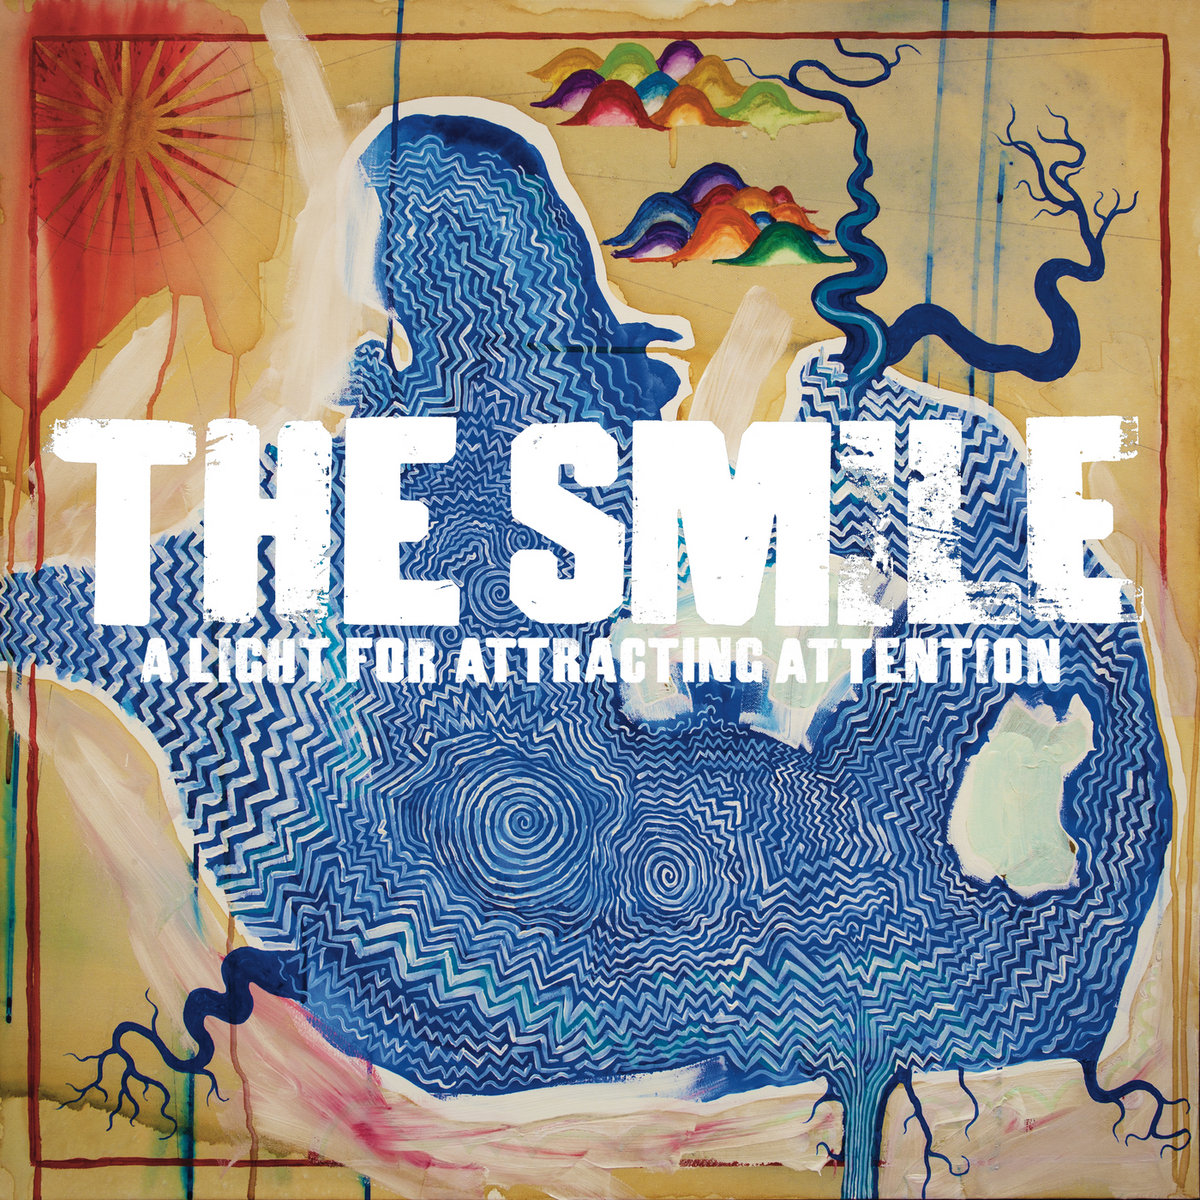 the smile-A Light for Attracting Attention